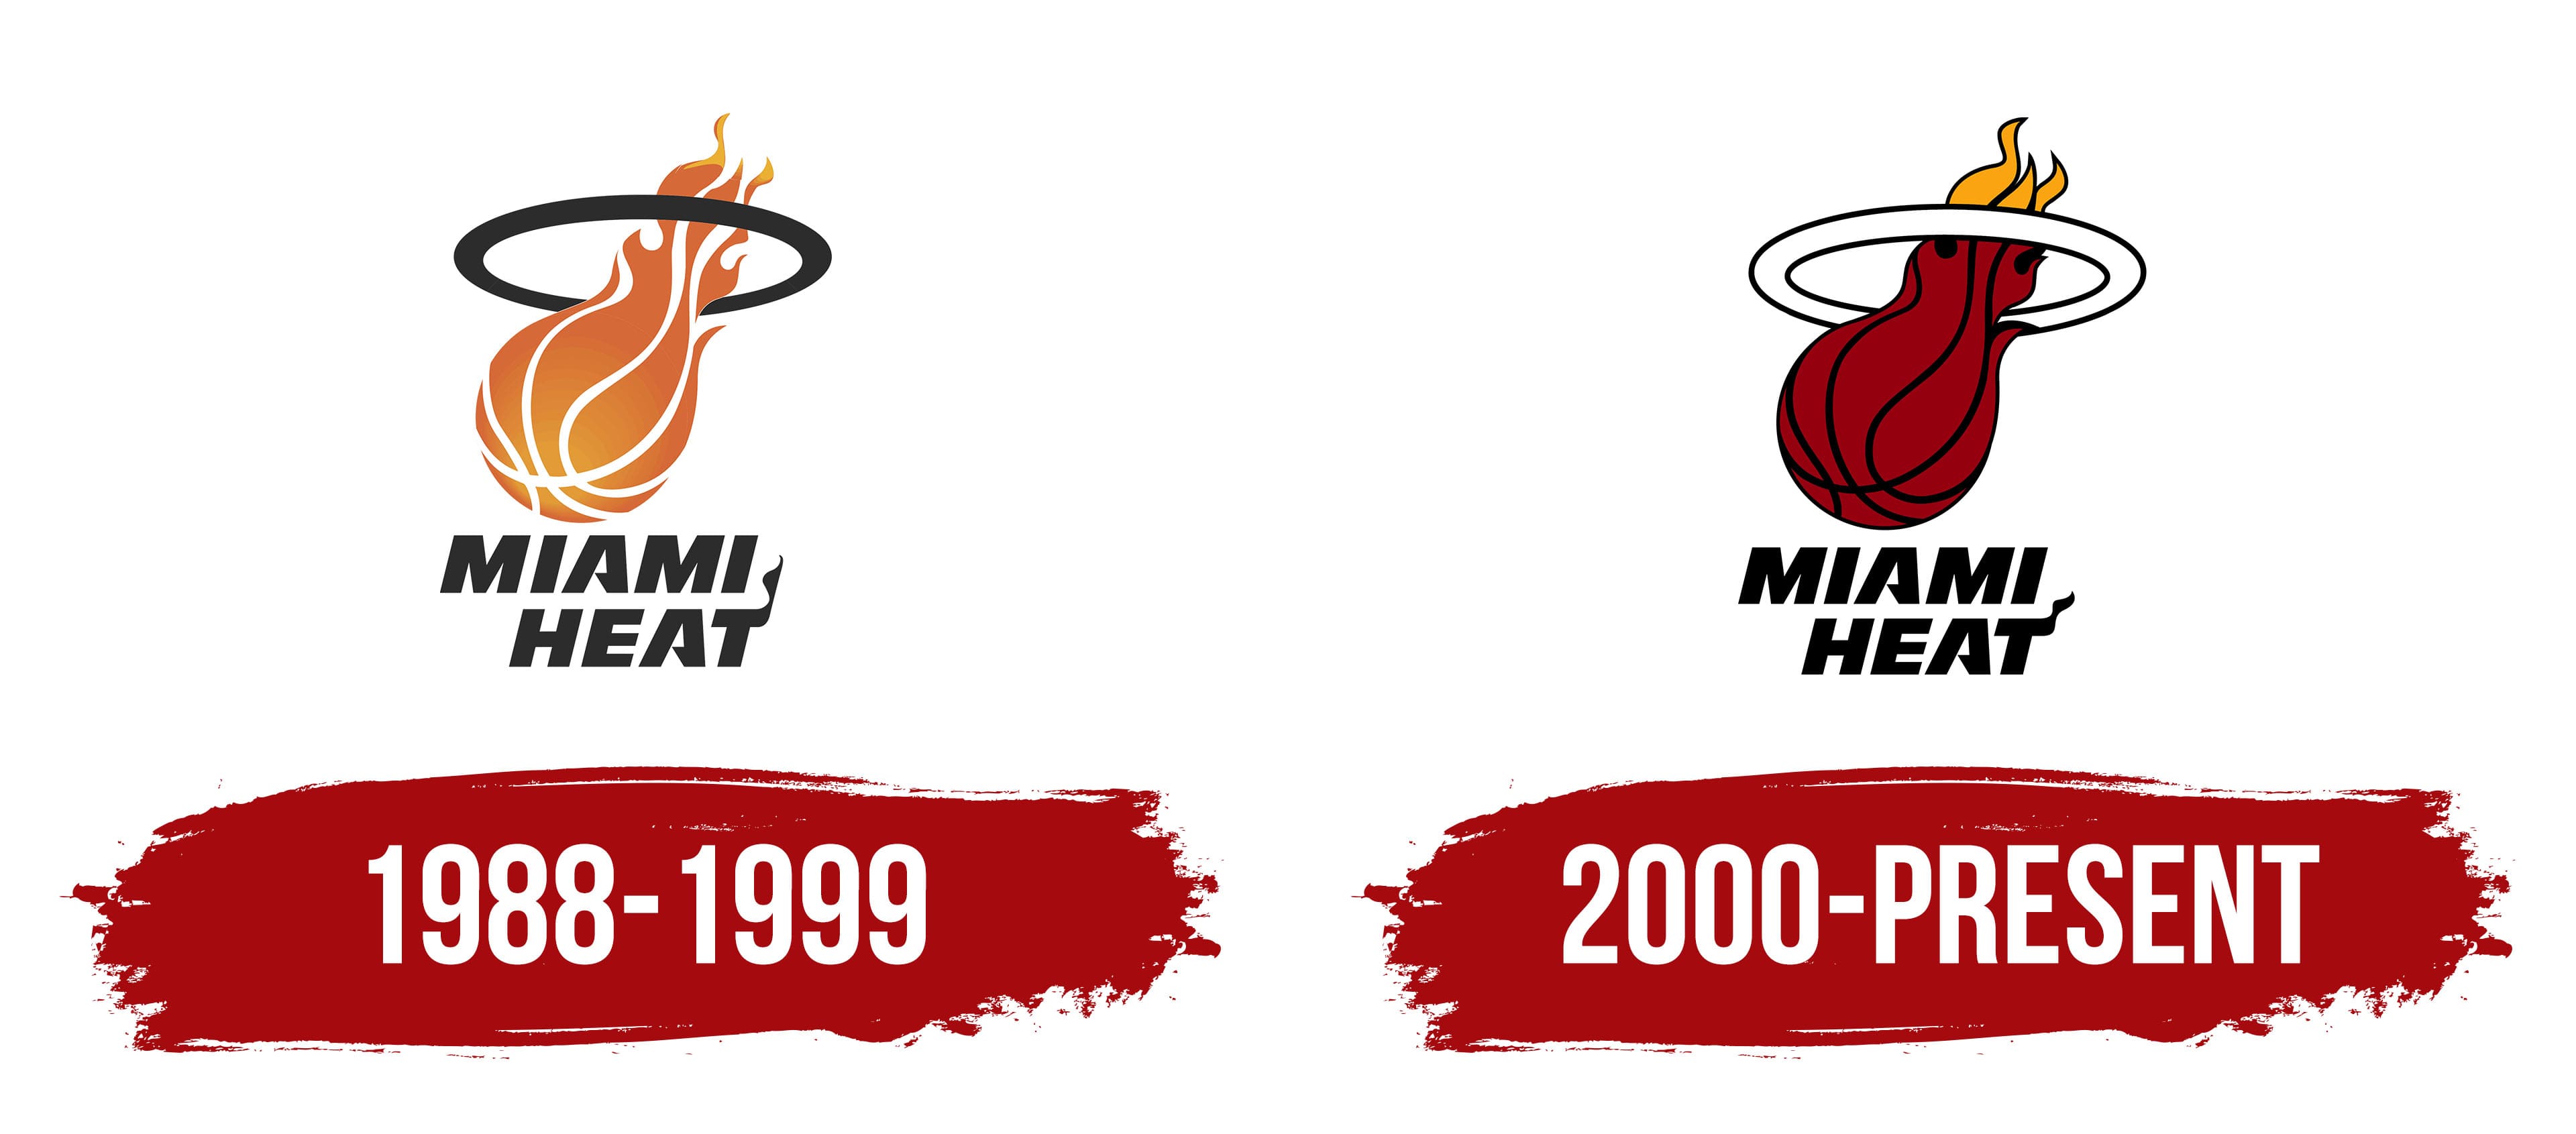 Miami Heat Logo, symbol, meaning, history, PNG, brand